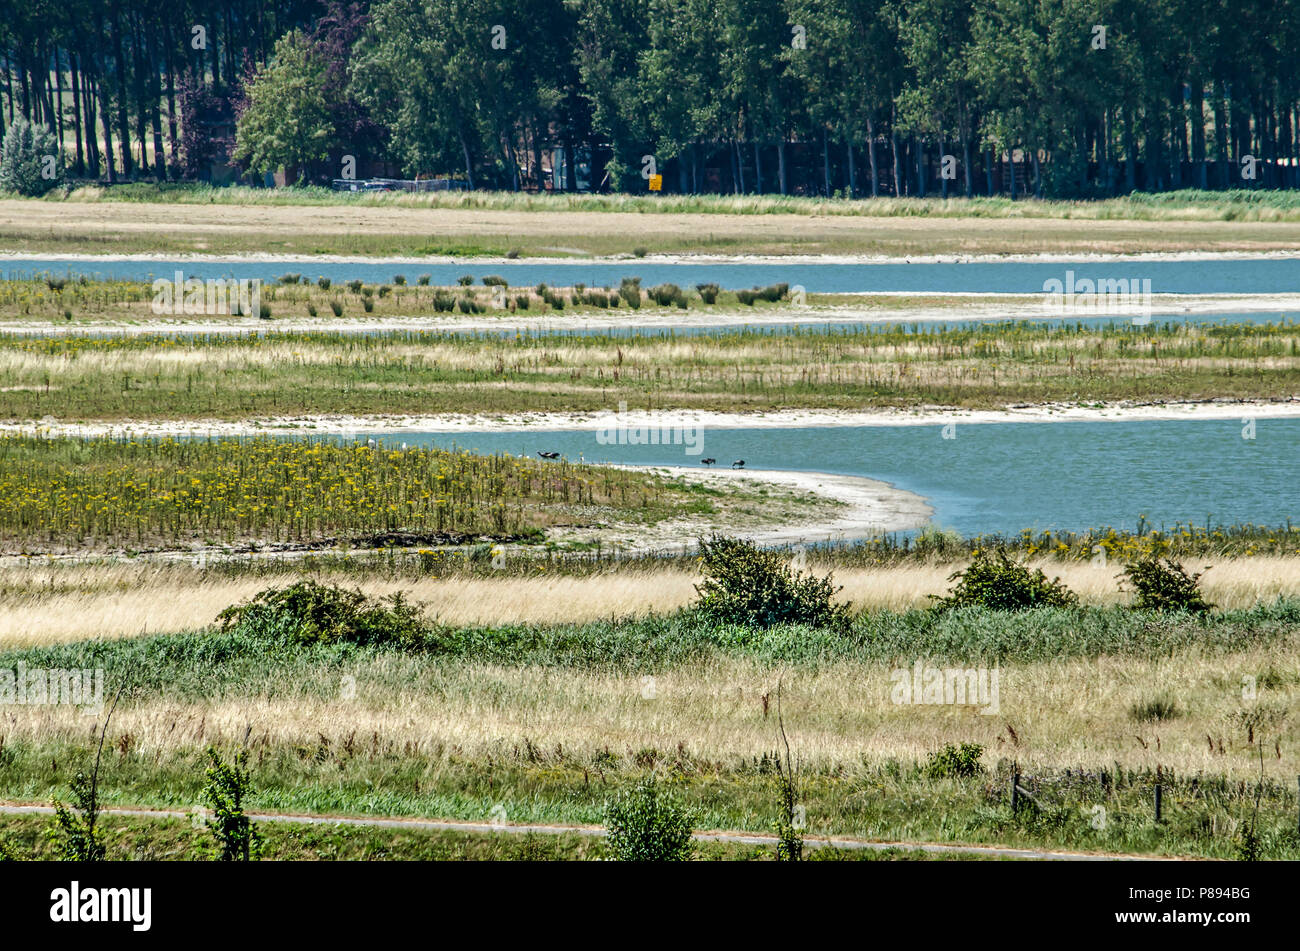 Municipality of Sluis, the Netherlands, July 2, 2018: newly developed tidal nature in combination with recreation and coastal defense at Waterdunen pr Stock Photo